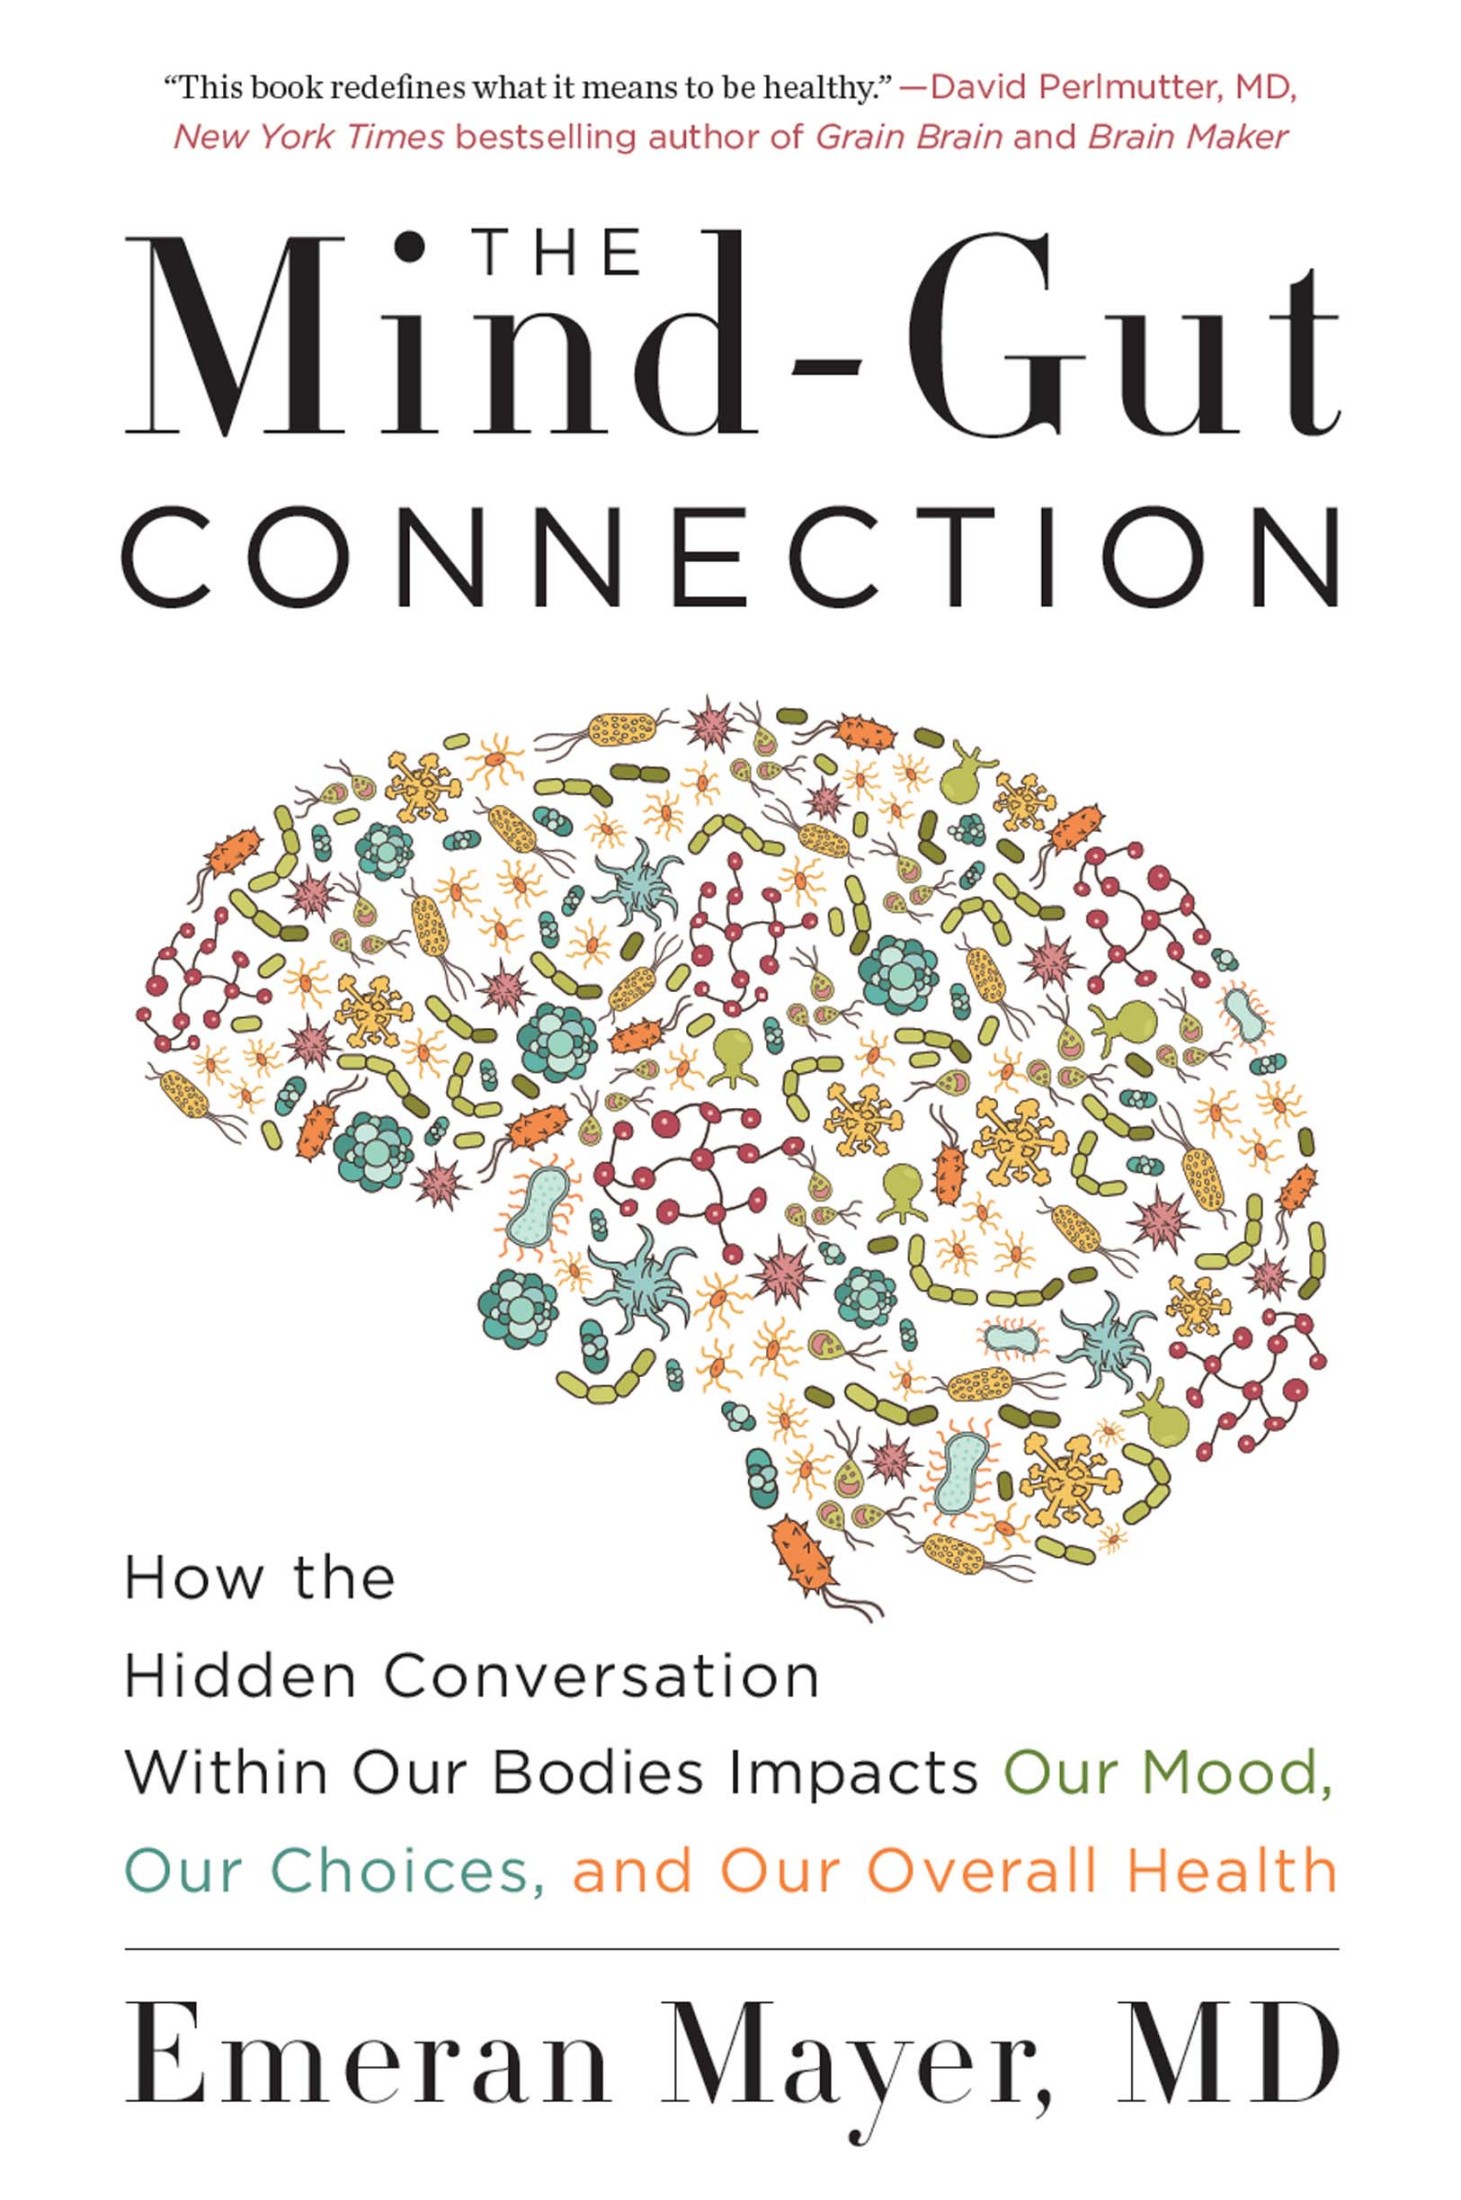 The Mind-Gut Connection: How the Hidden Conversation Within Our Bodies Impacts Our Mood, Our Choices, and Our Overall Health